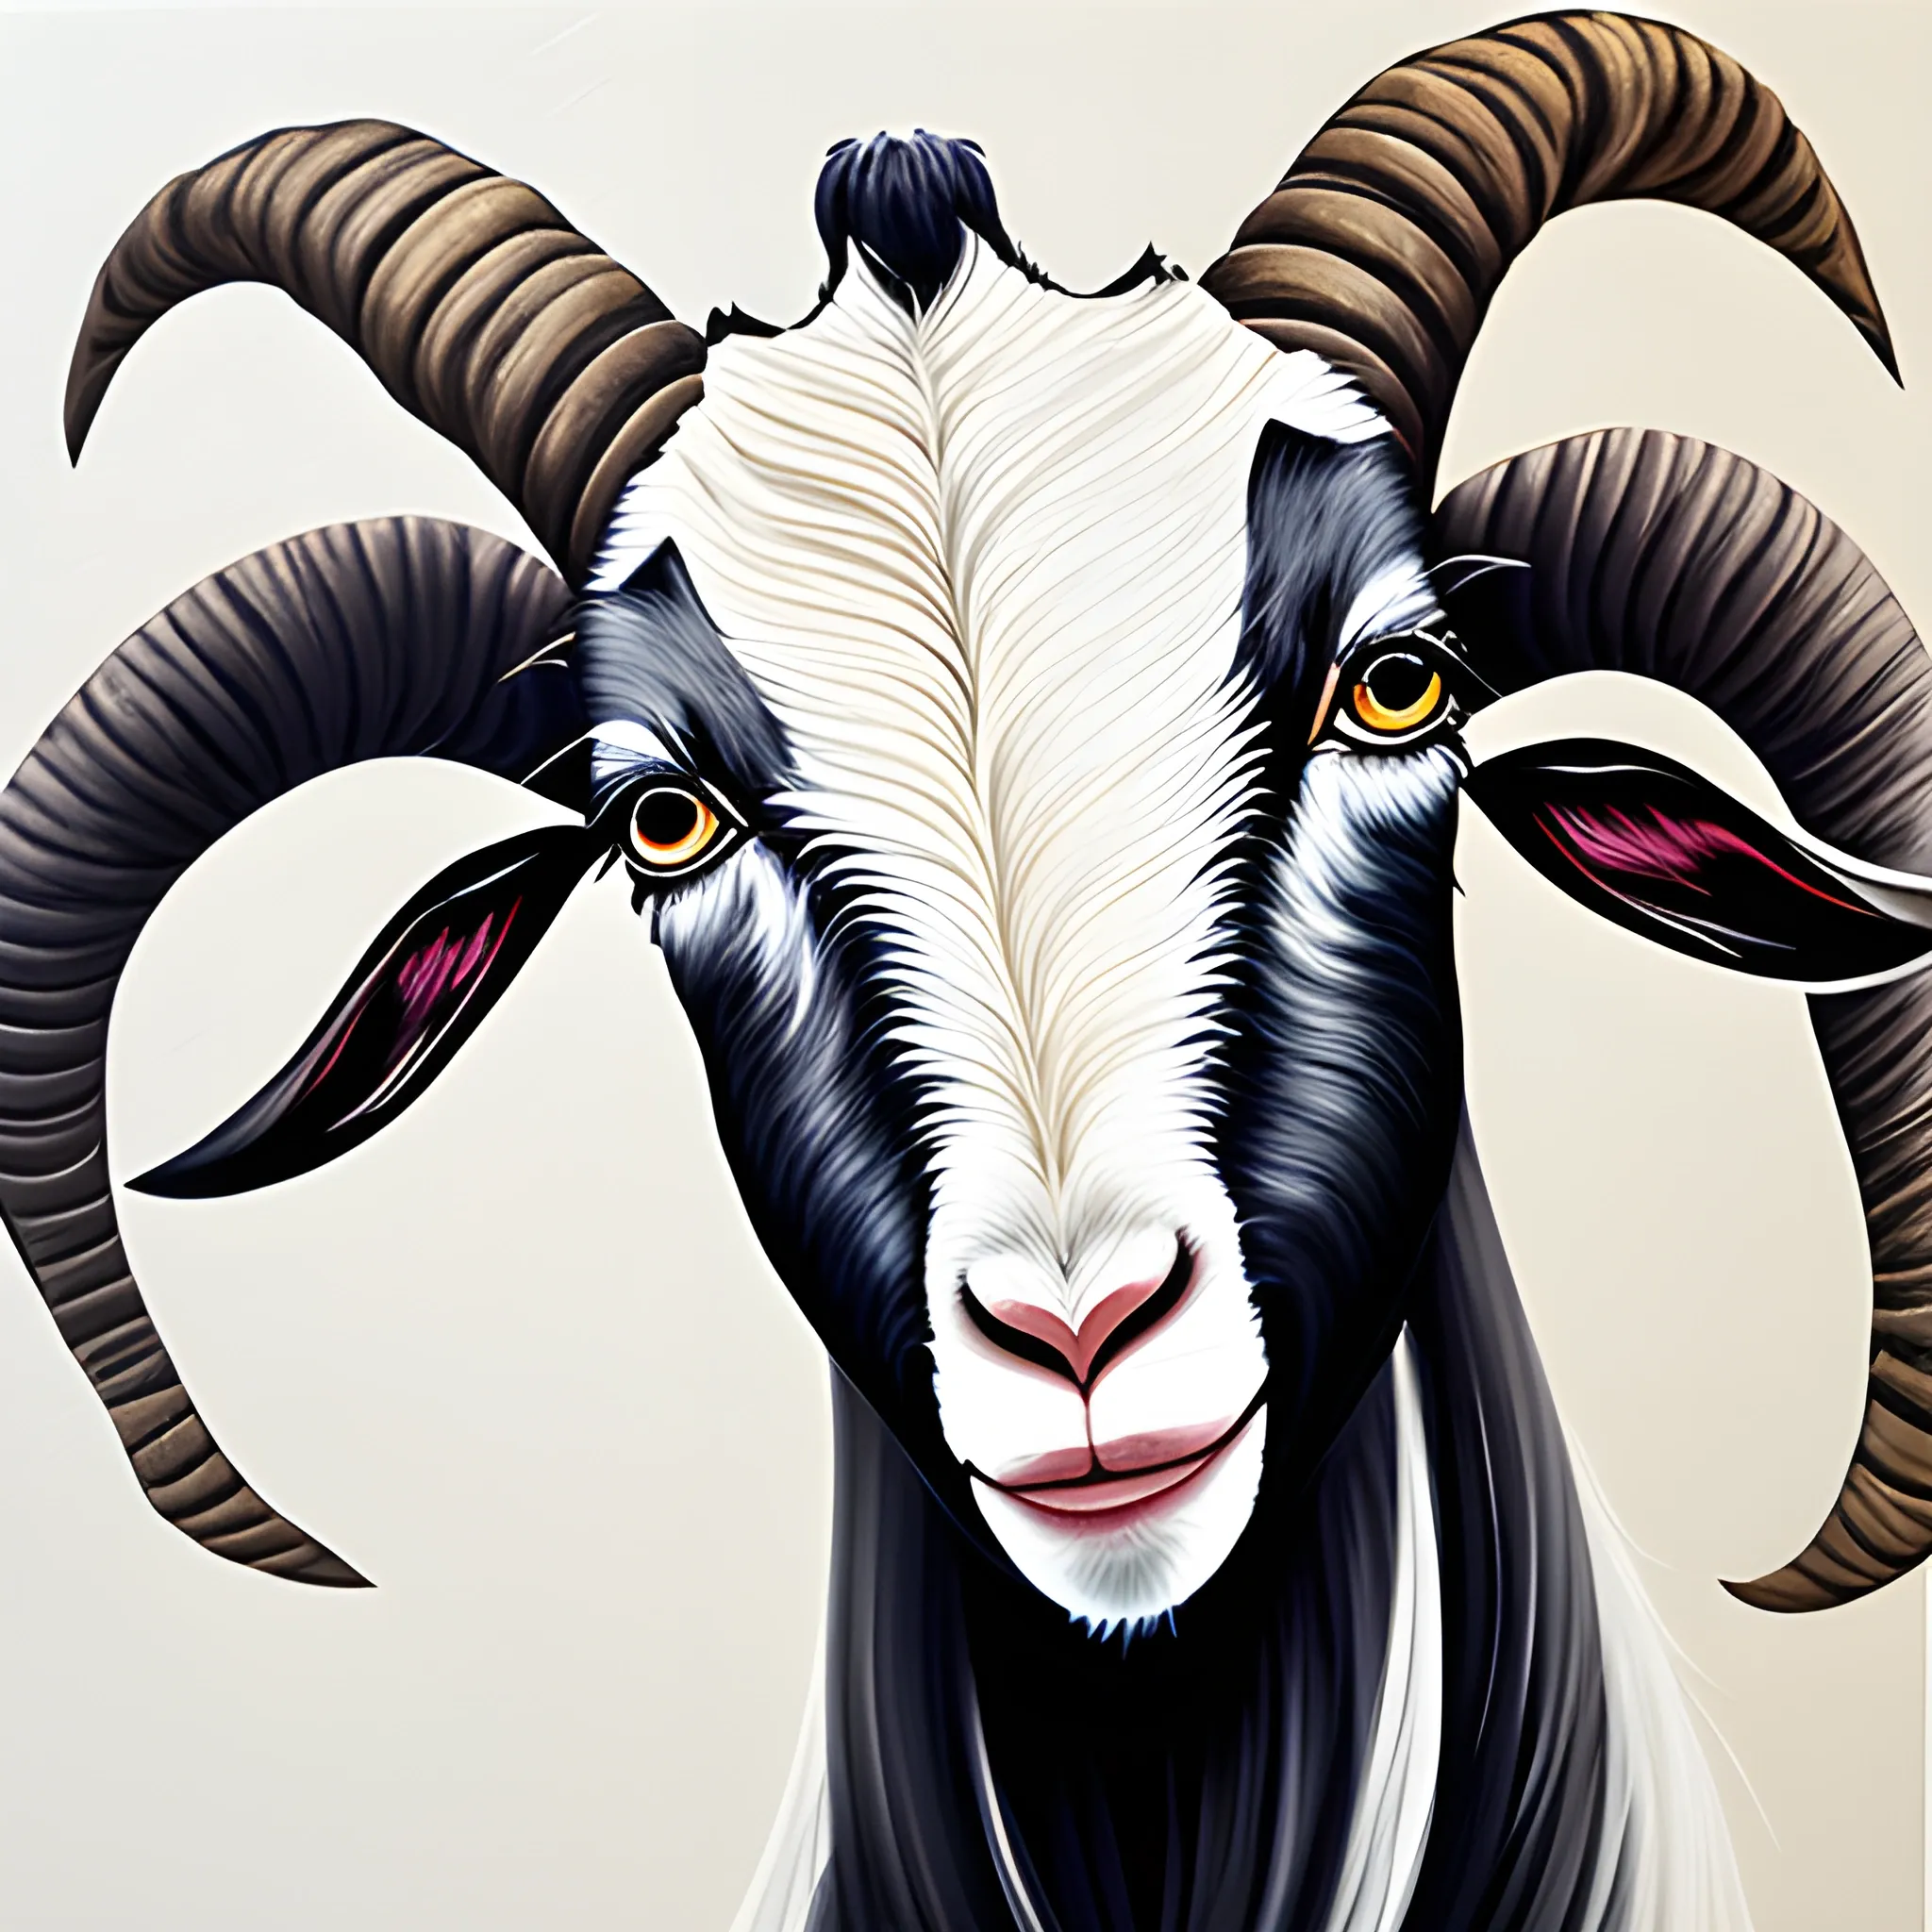 Calligraphy painting of 1 goat